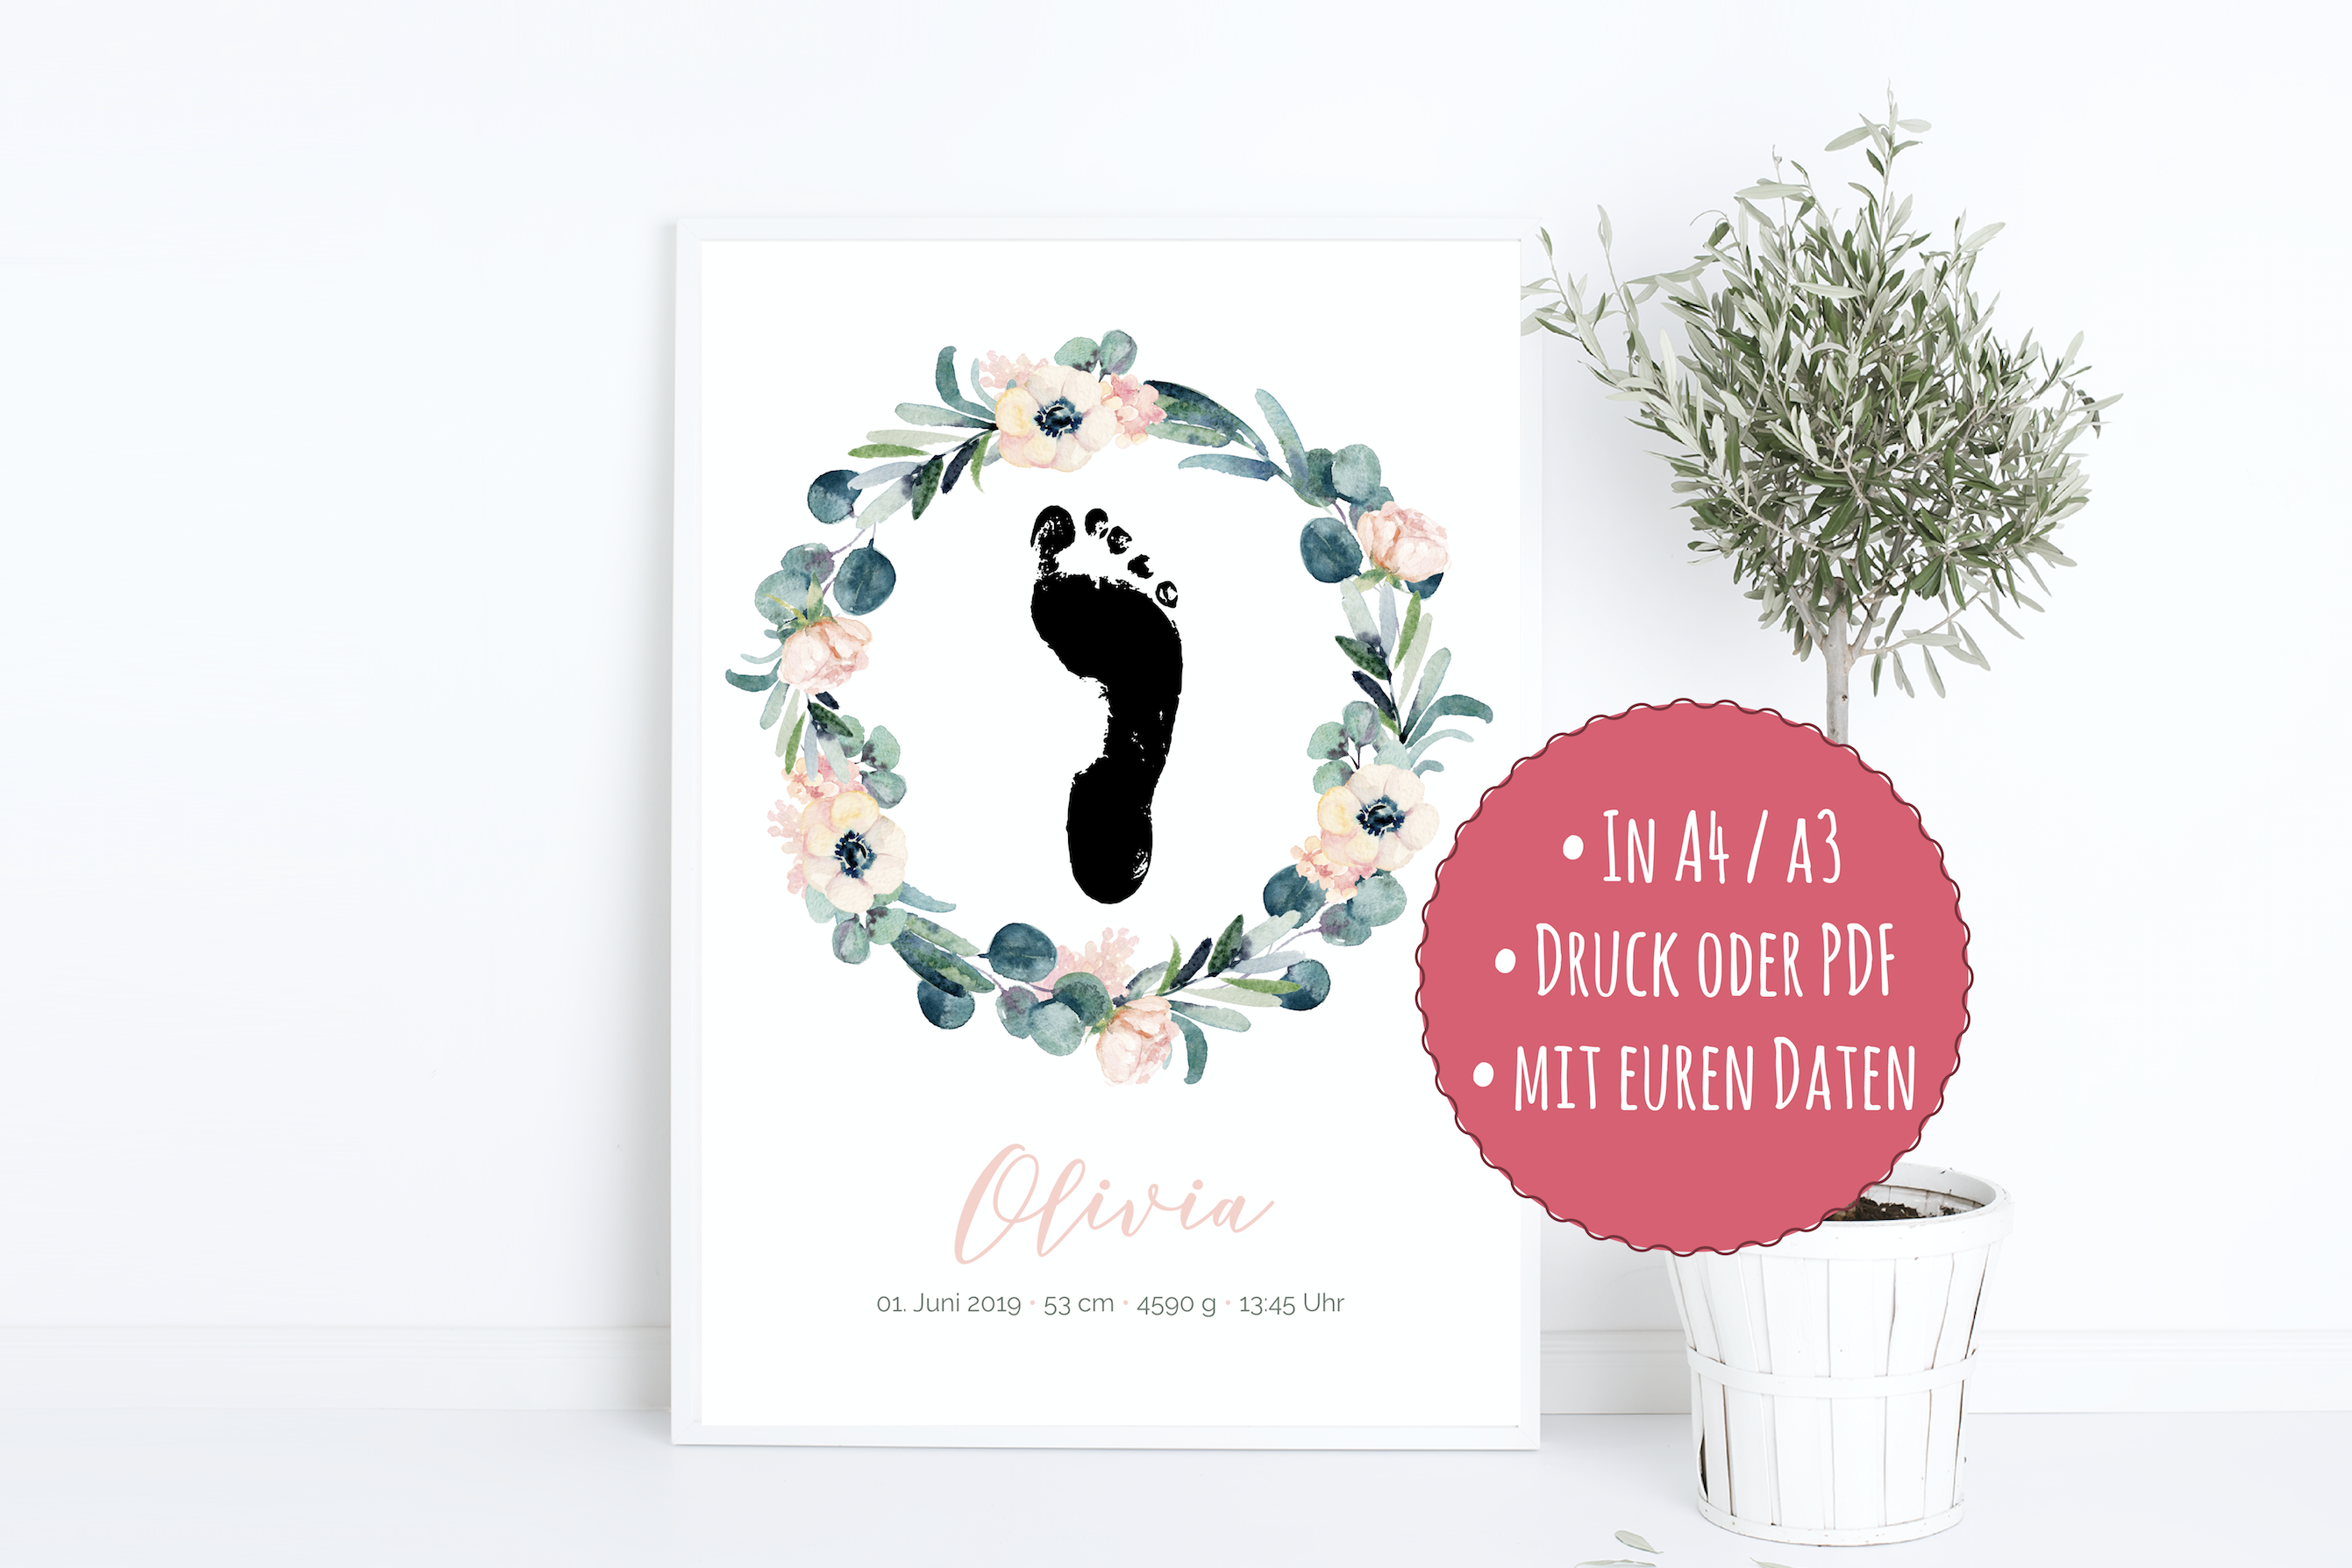 Footprint Baby From 8 50 Euro Birth Dates Pink Baby Party In Pink With Name Gift Is Personalized As Print Or Pdf In 2020 Baby Party Name Gifts Gifts